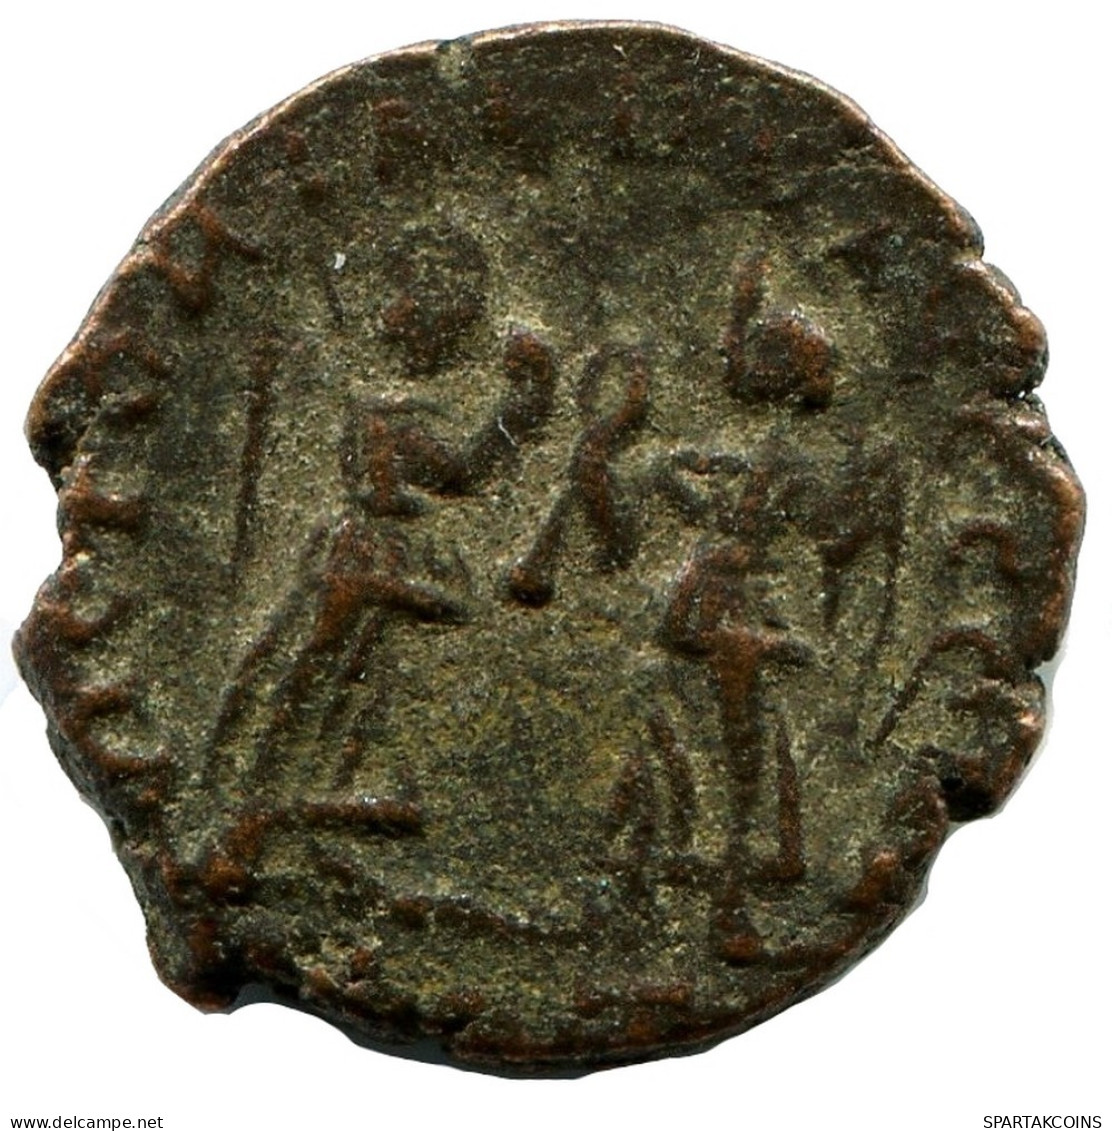 CONSTANS MINTED IN ROME ITALY FOUND IN IHNASYAH HOARD EGYPT #ANC11519.14.E.A - The Christian Empire (307 AD To 363 AD)